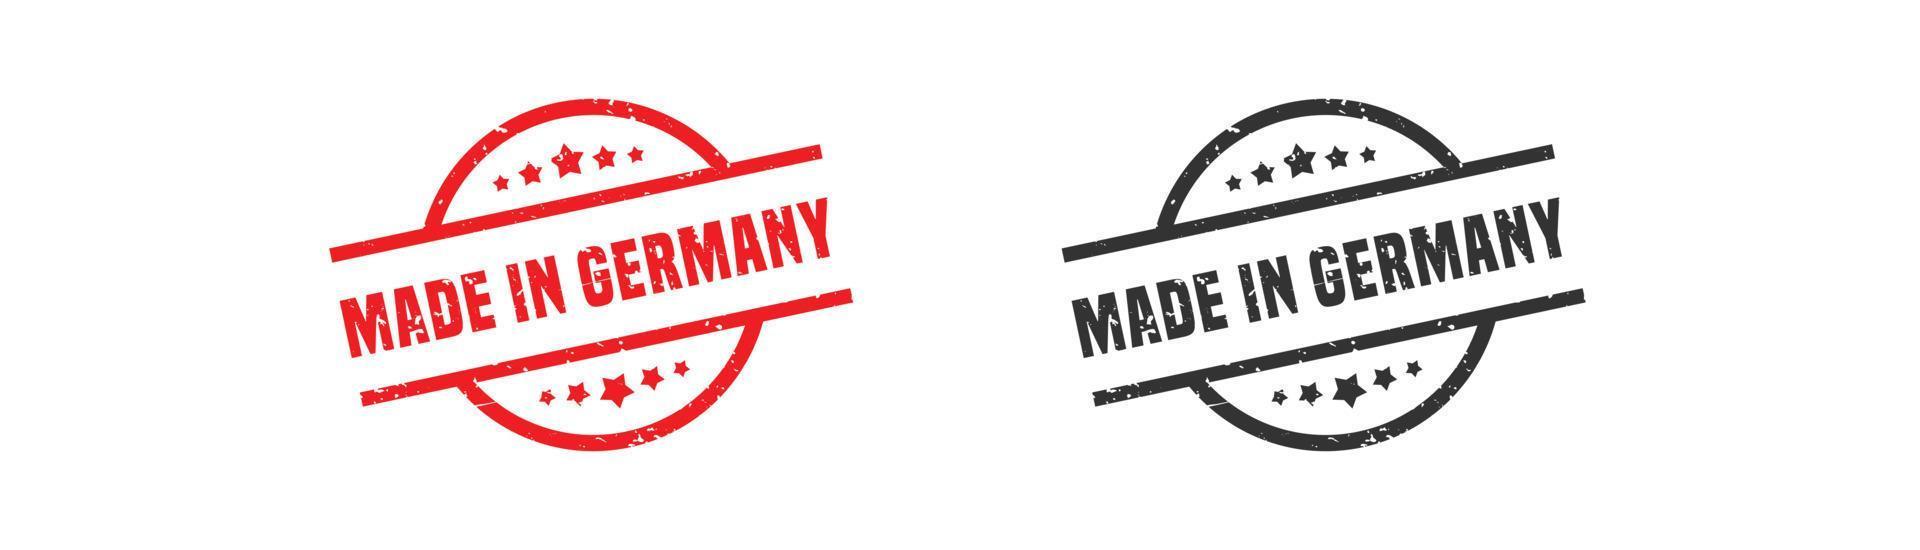 Made in germany stamp rubber with grunge style on white background. vector